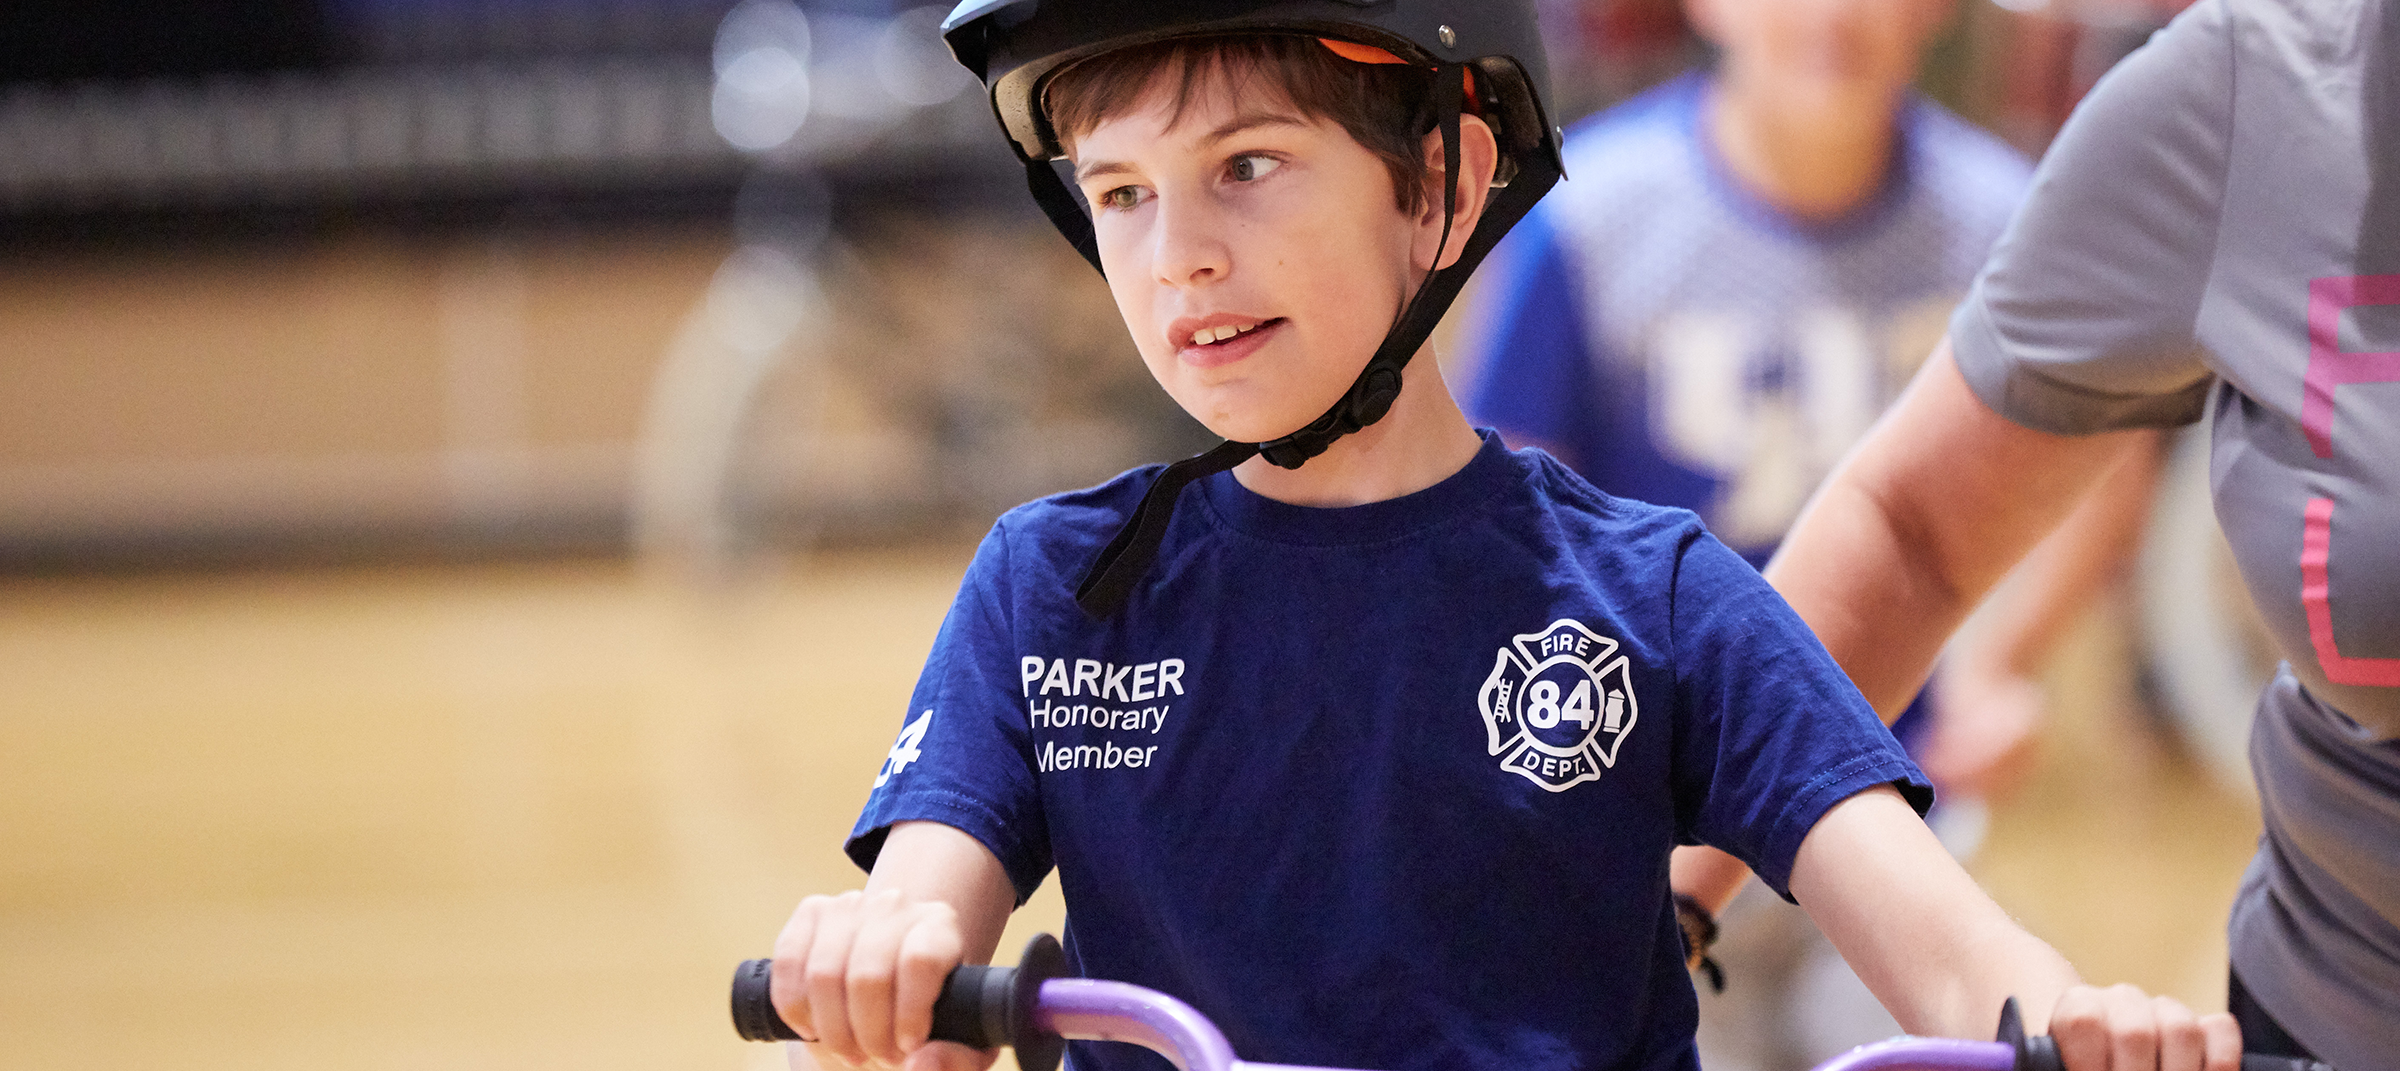 10-Year-Old With Traumatic Brain Injury Re-Learns How to Ride Bike